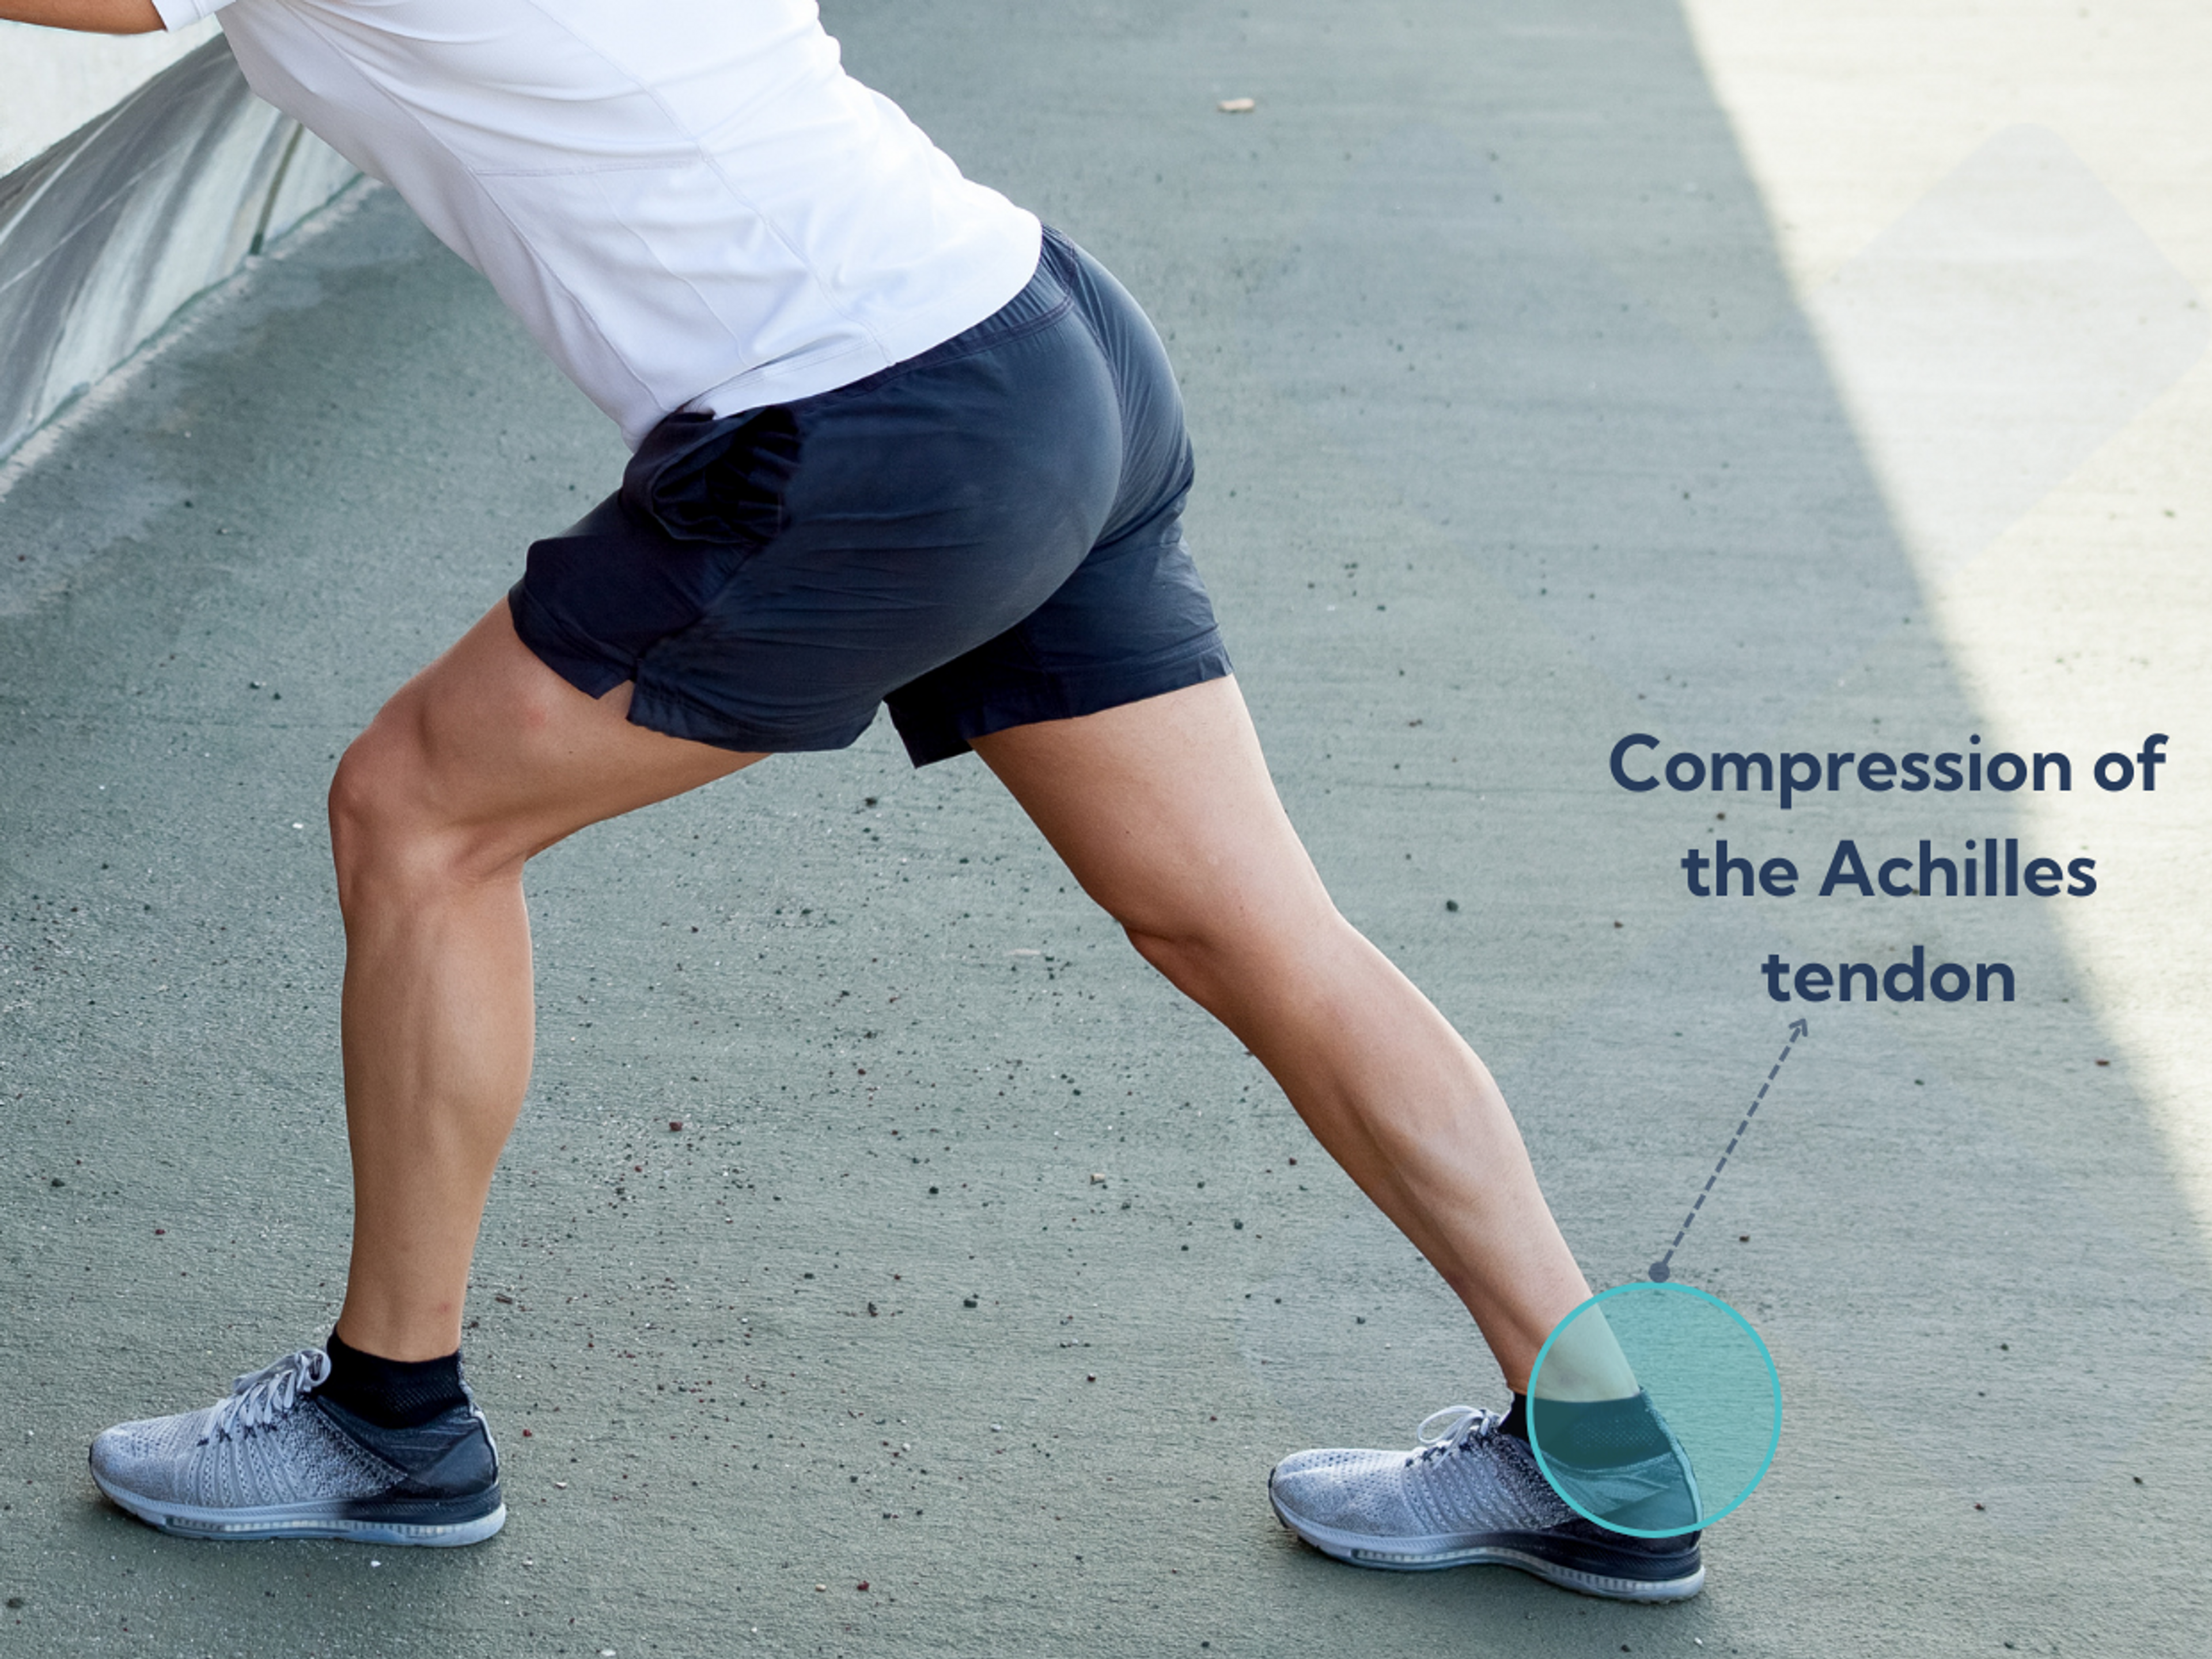 Calf stretches cause compression of the Achilles tendon against the heel bone and can further irritate your Achilles tendonitis.